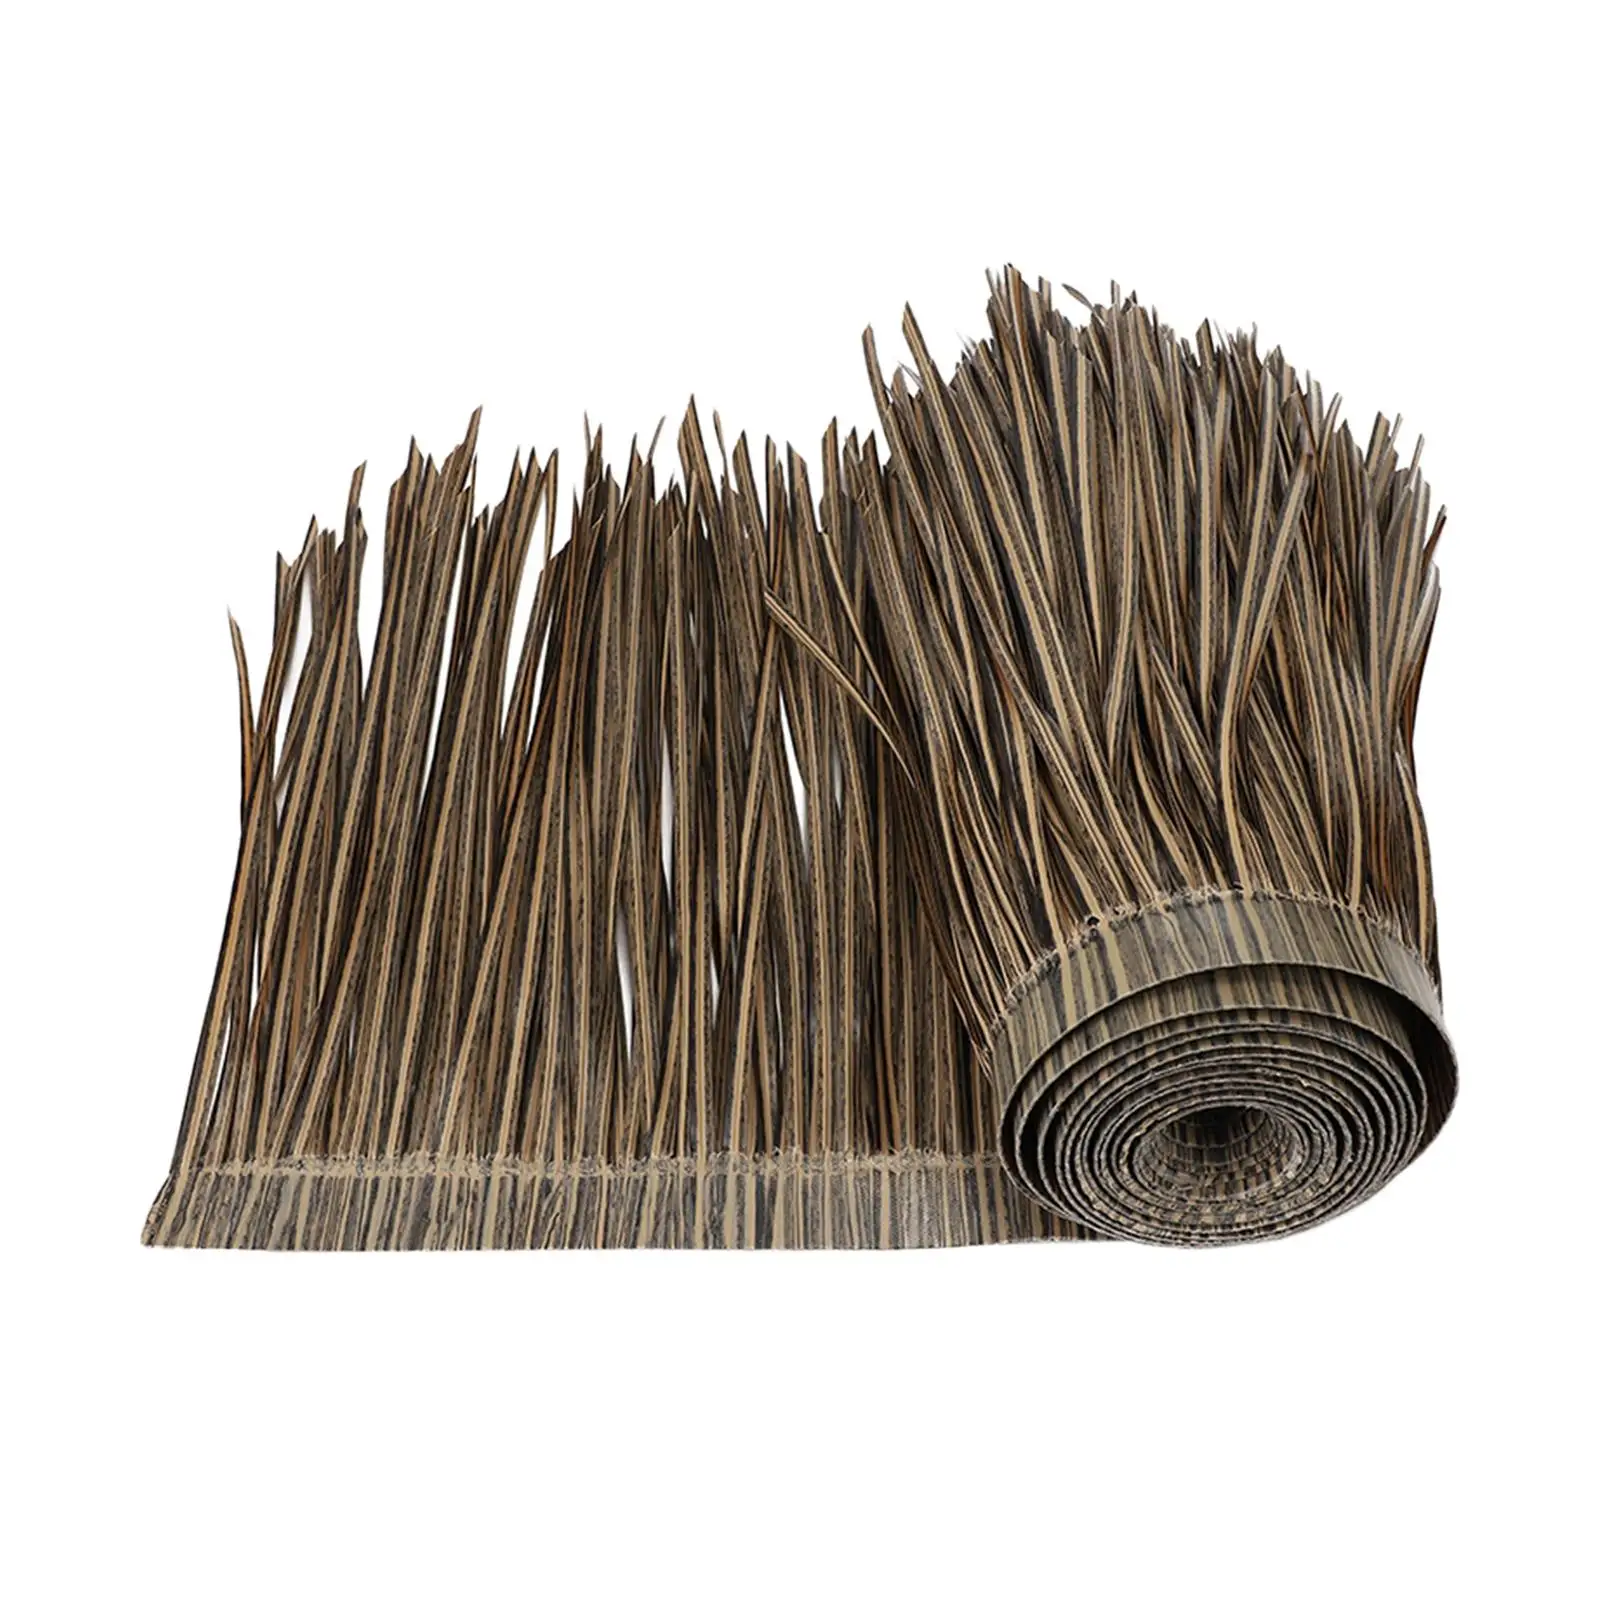 Straw Roof Thatch Fake Equipment Artificial Palm Thatch for Bar